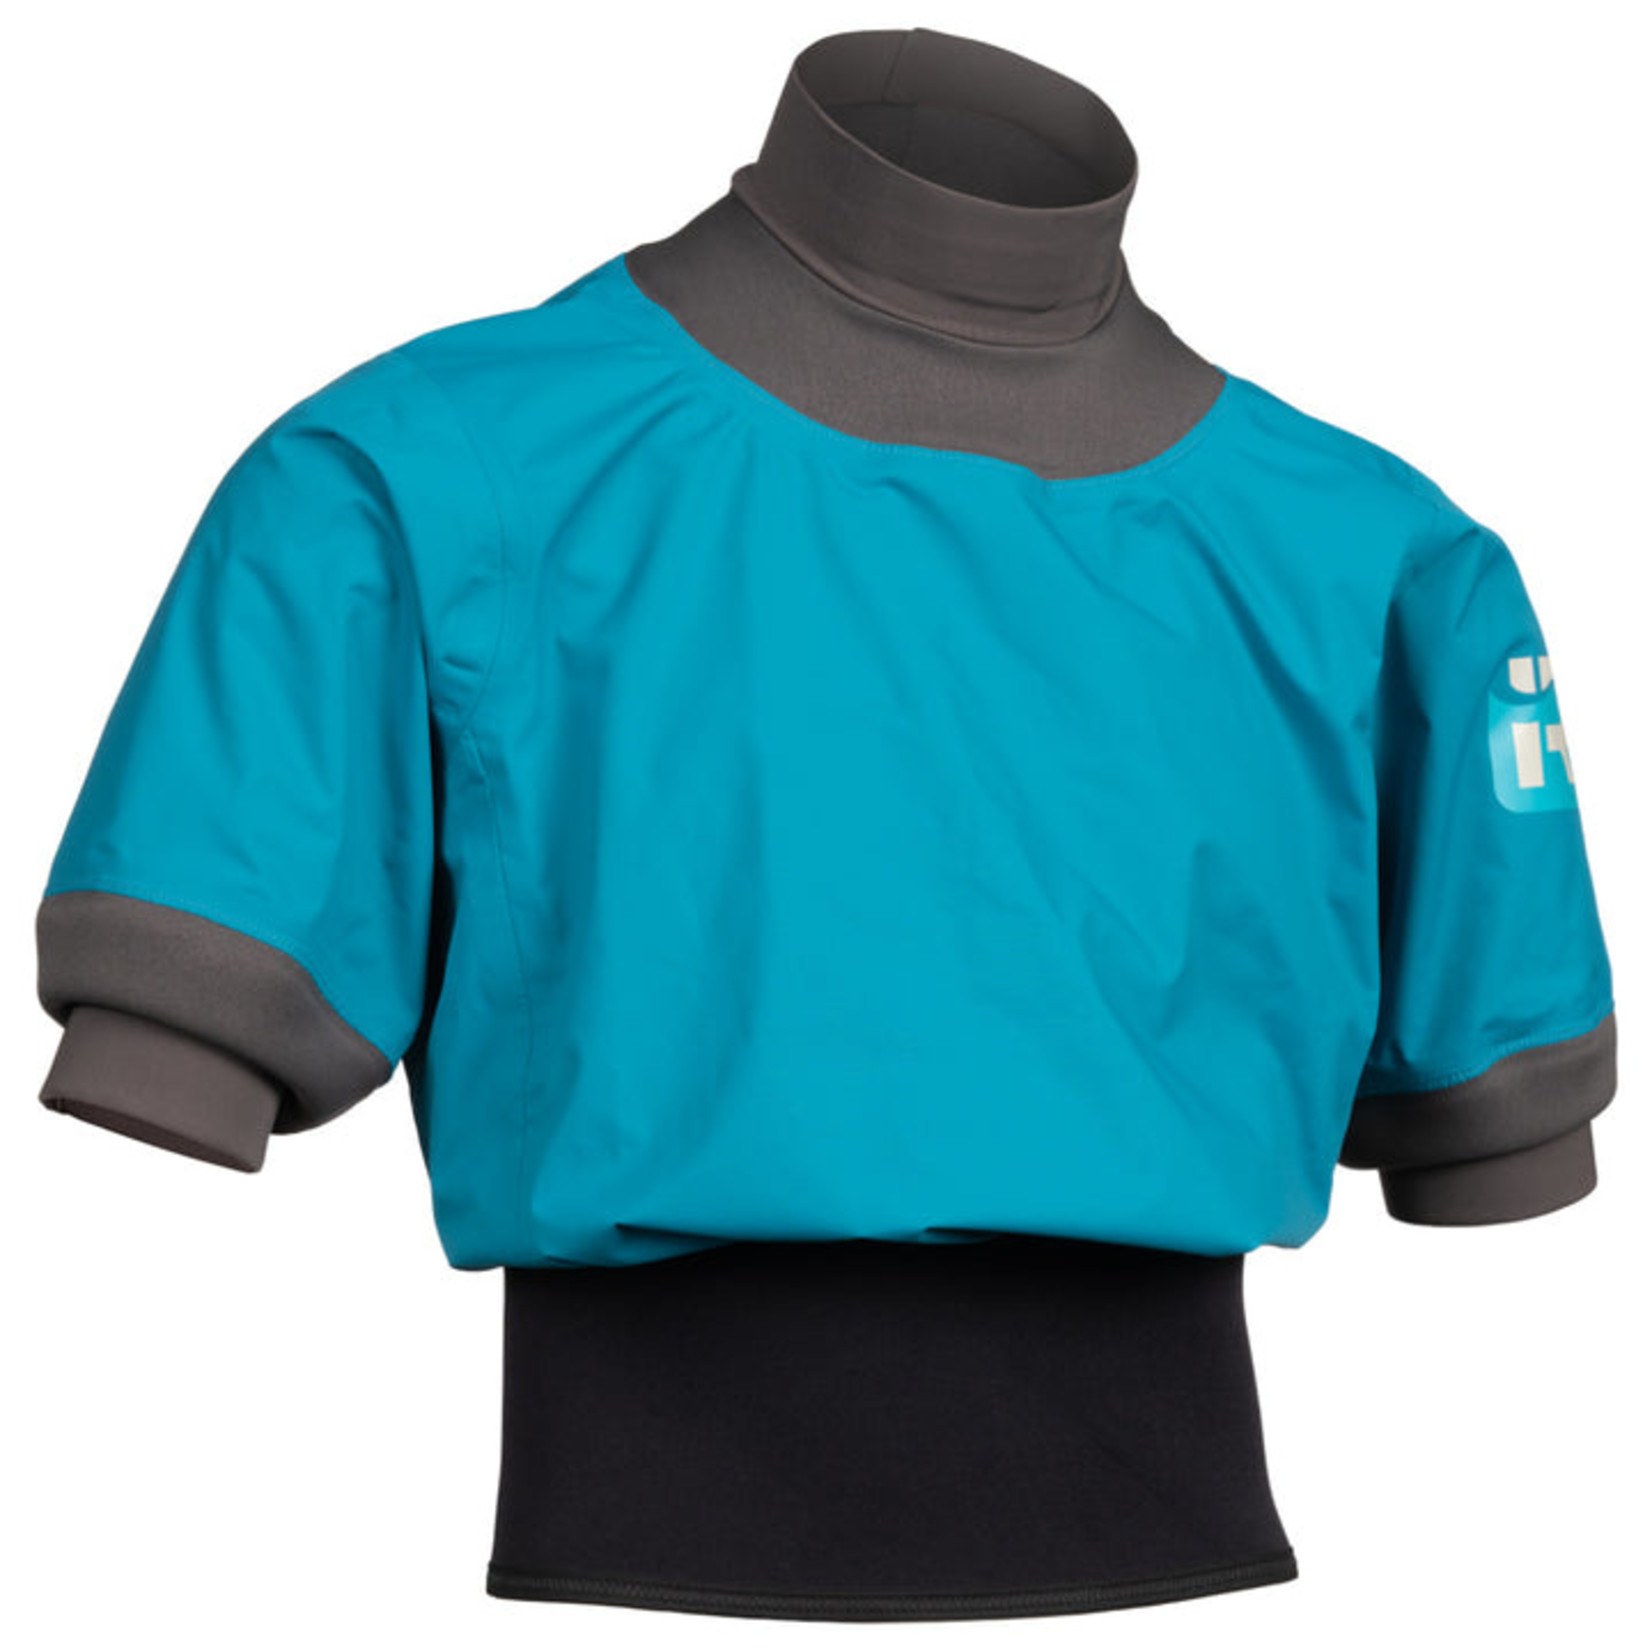 Immersion Research Immersion Research Short Sleeve Nano Jacket